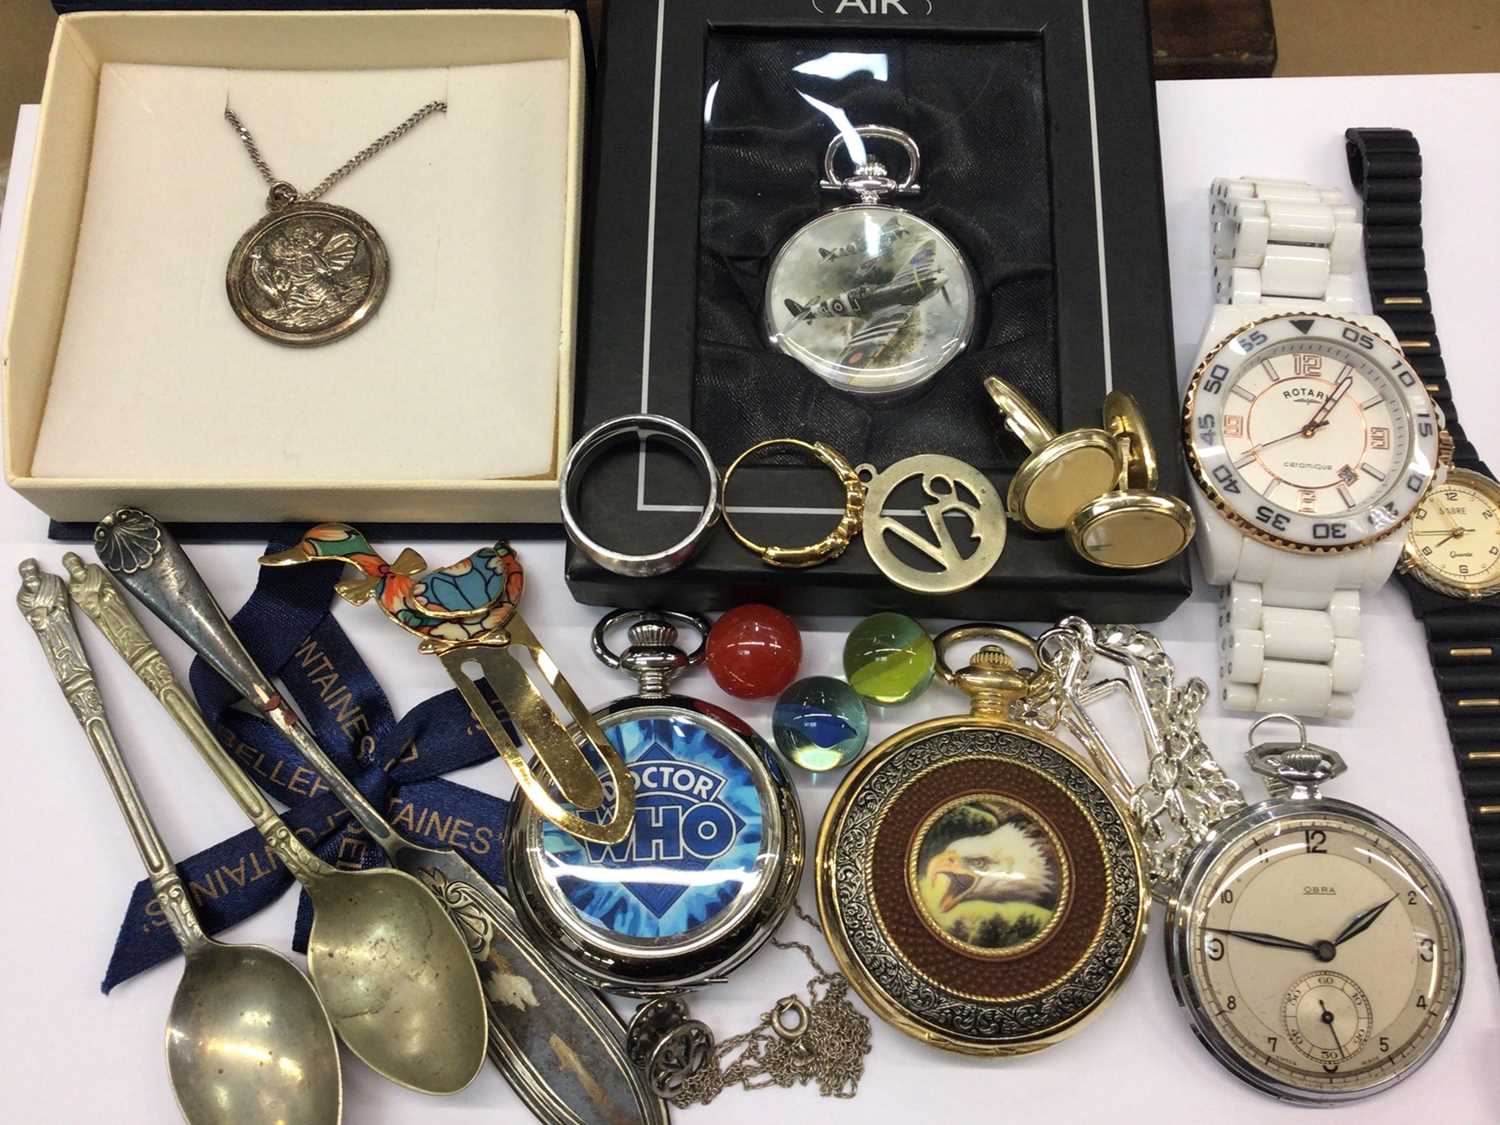 Lot 801 - Silver St. Christopher pendant on chain, various pocket watches, Rotary Ceramique wristwatch and bijouterie